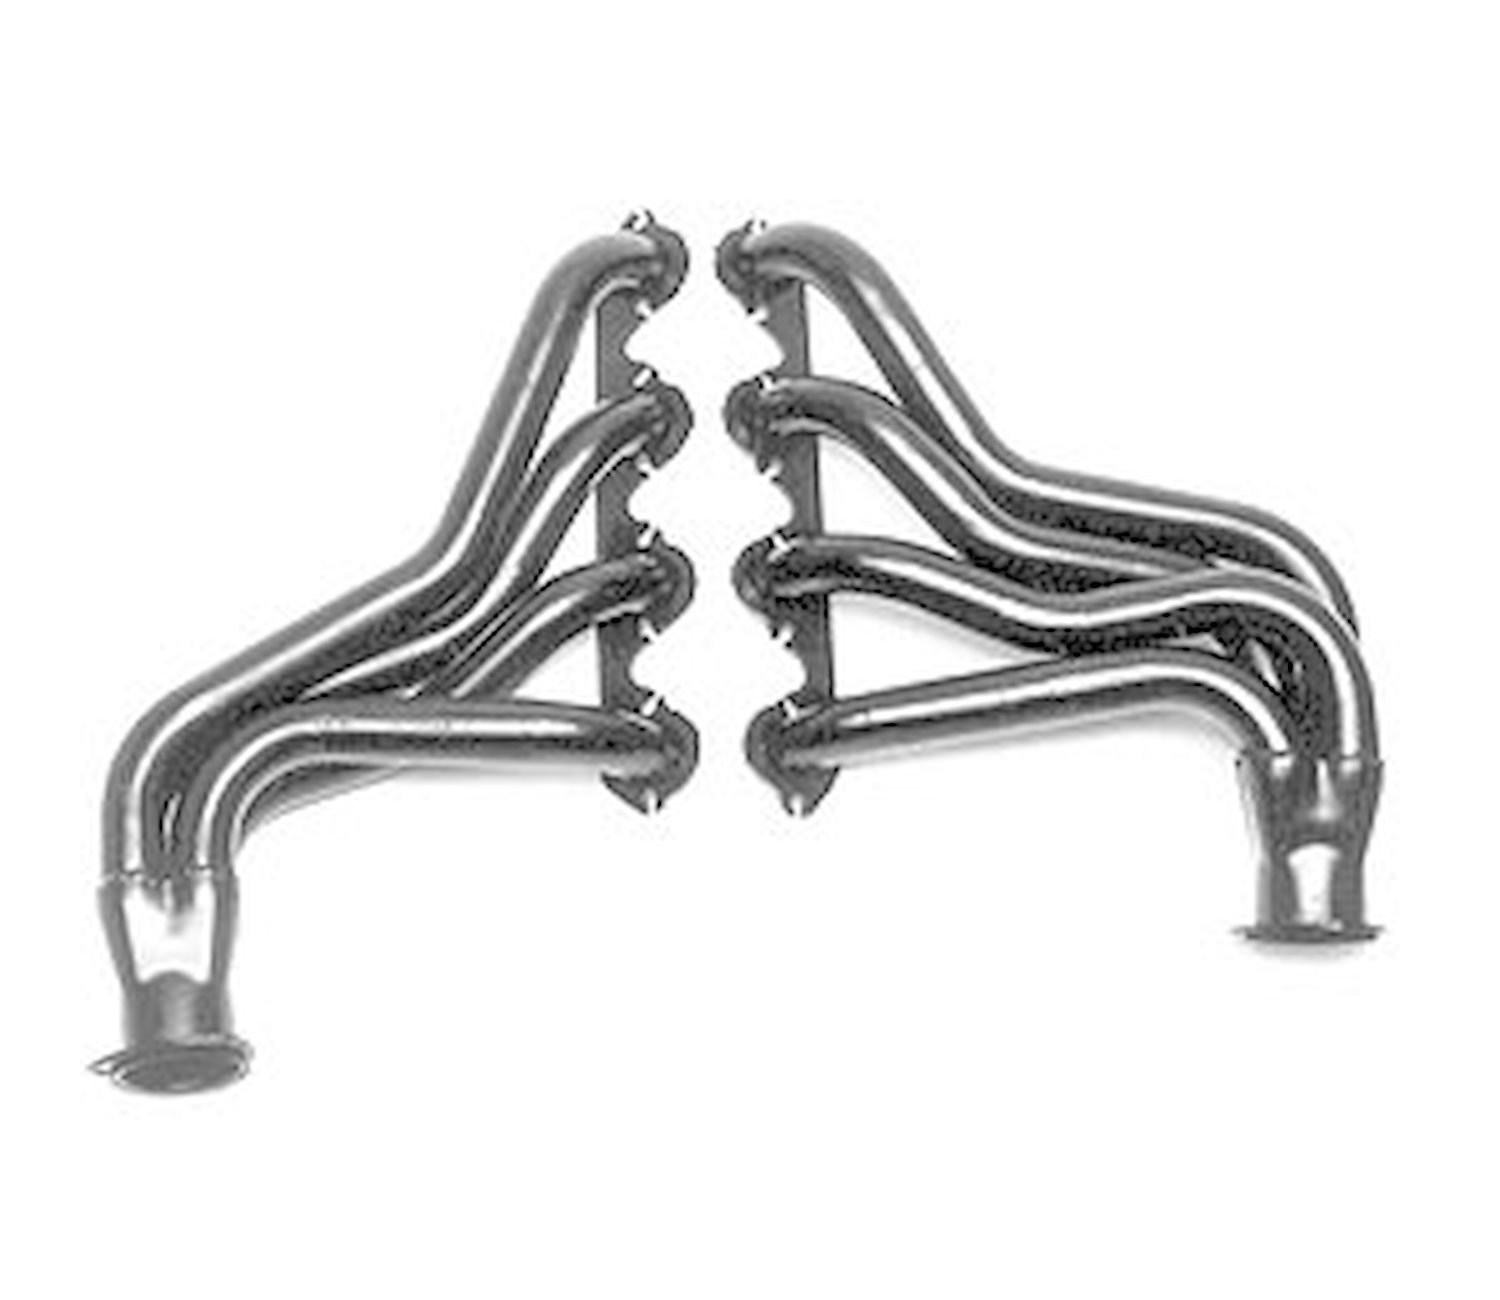 Standard Duty Uncoated Headers for 1974-79 1/2, 3/4 & 1-Ton P/U 429-460